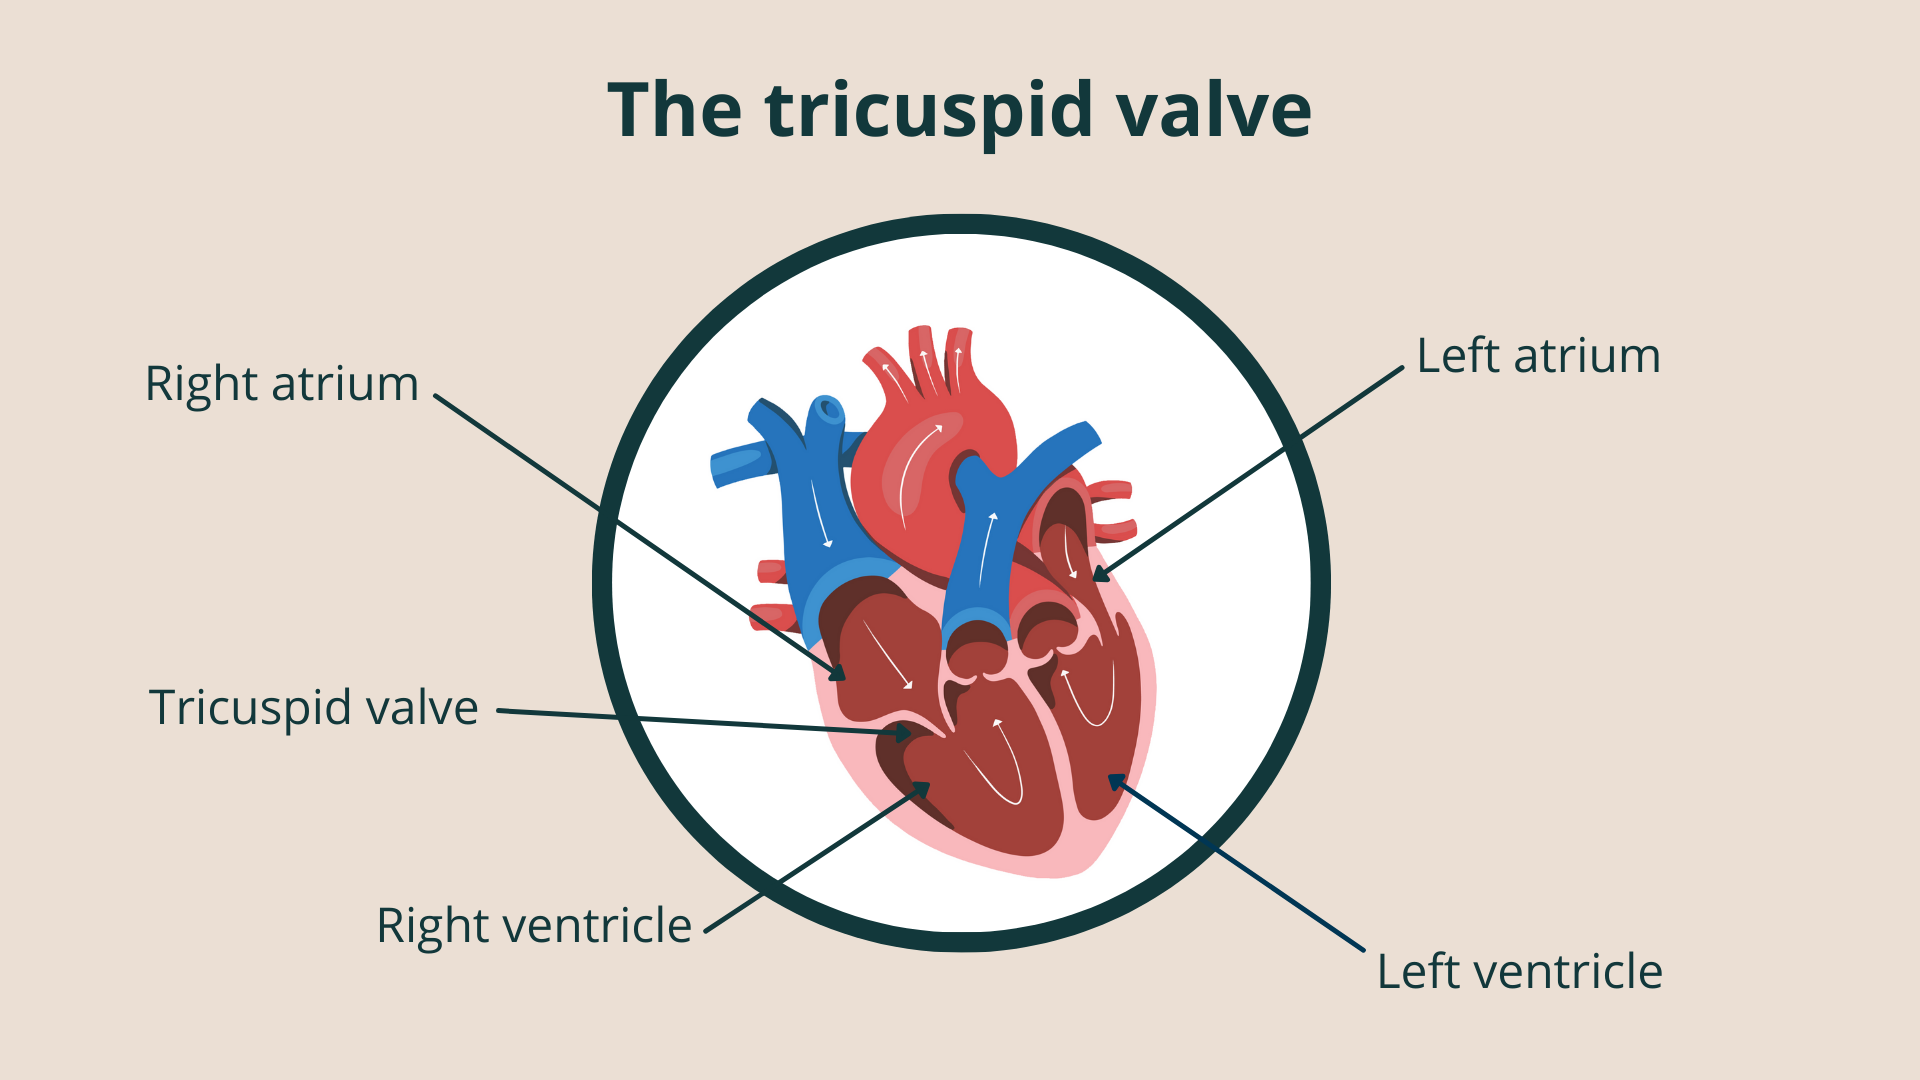 An illustration showing the location of the tricuspid valve